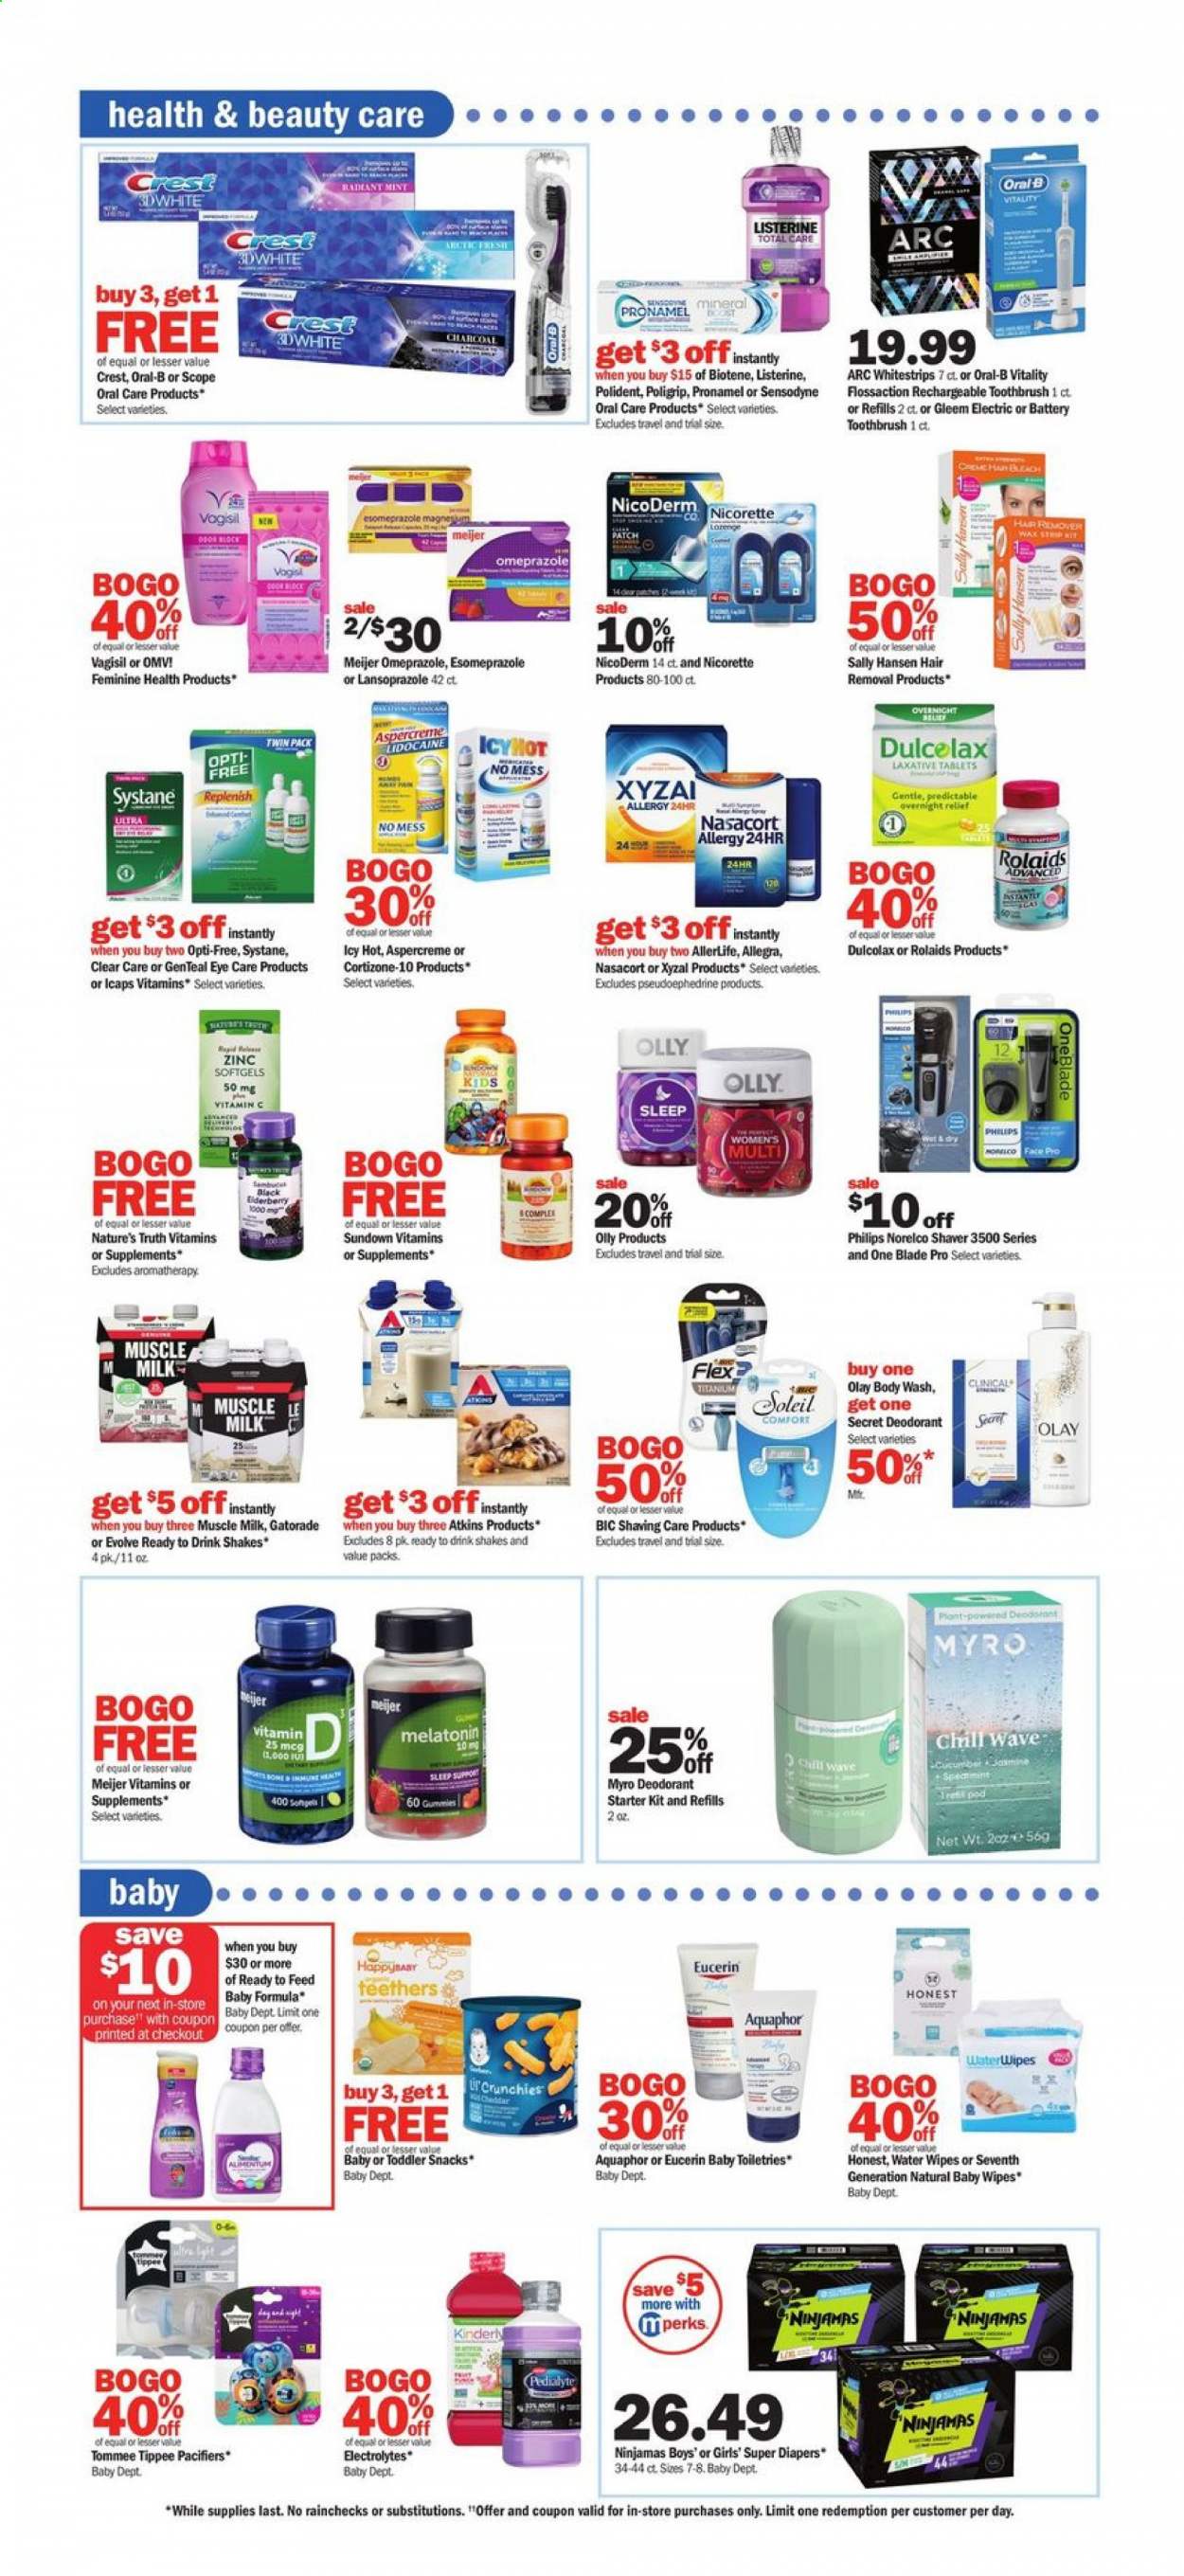 thumbnail - Meijer Flyer - 06/20/2021 - 06/26/2021 - Sales products - milk, shake, muscle milk, snack, Gatorade, Boost, wipes, baby wipes, nappies, Aquaphor, bleach, WAVE, body wash, Biotene, Listerine, toothbrush, Oral-B, Sensodyne, Polident, Crest, Olay, Eucerin, anti-perspirant, deodorant, BIC, hair removal, shaver, Sally Hansen, Philips, Norelco, Clear Care, Dulcolax, magnesium, Nature's Truth, NicoDerm, Nicorette, Systane, vitamin c, Aspercreme, zinc, laxative. Page 17.